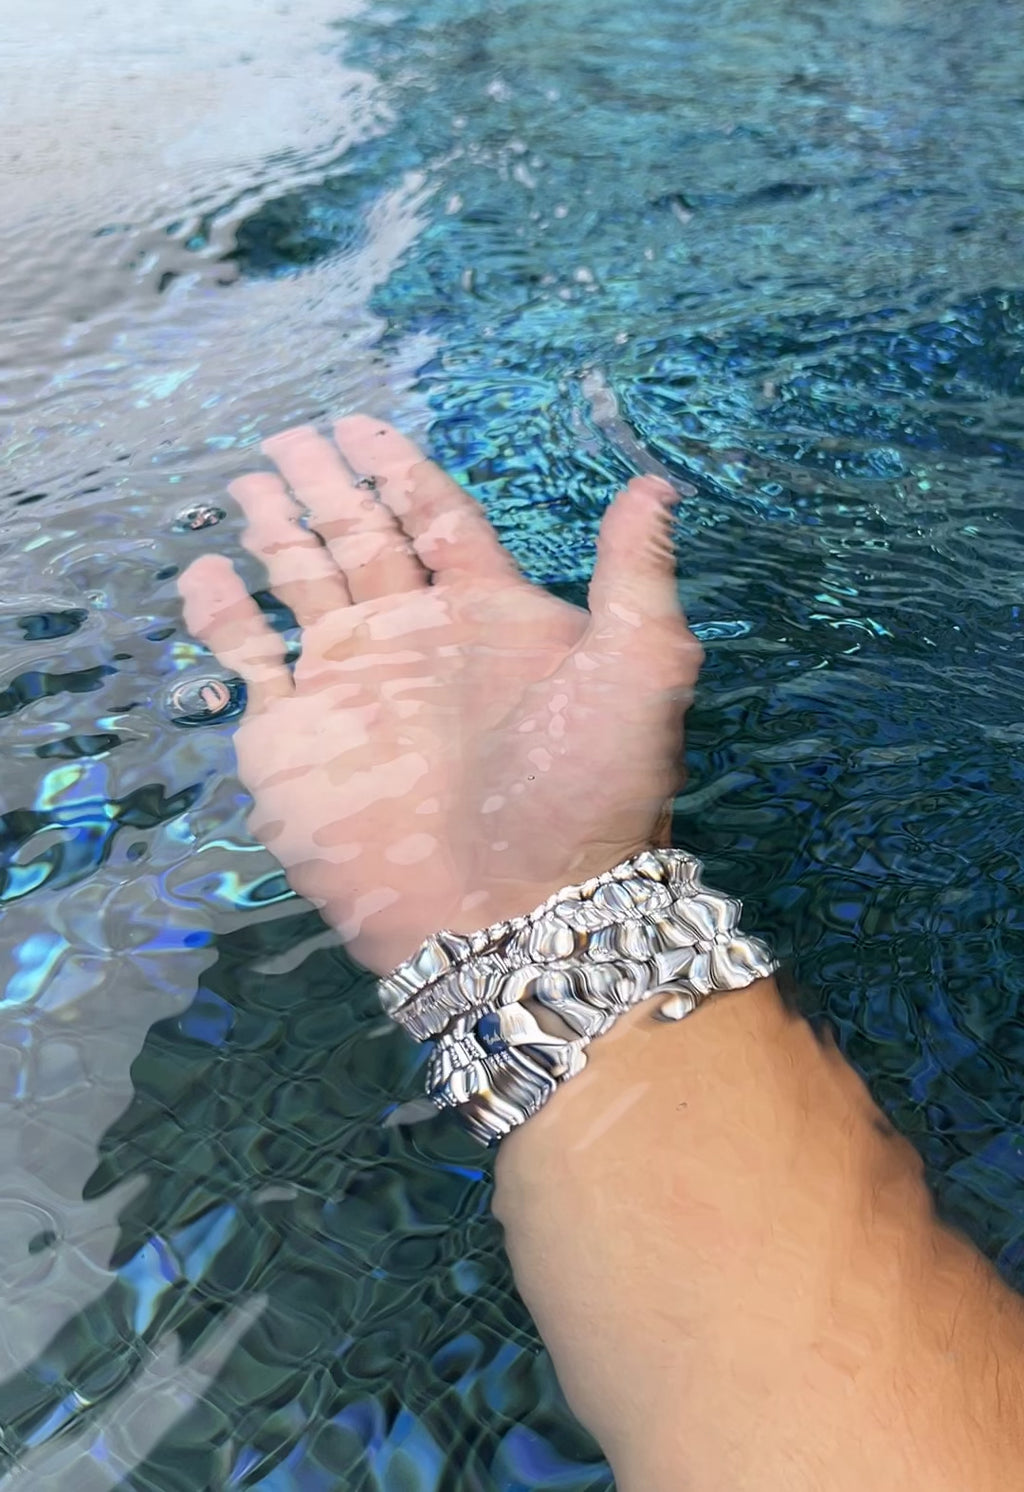 Video showing the quality of the iced out president bracelet in a pool